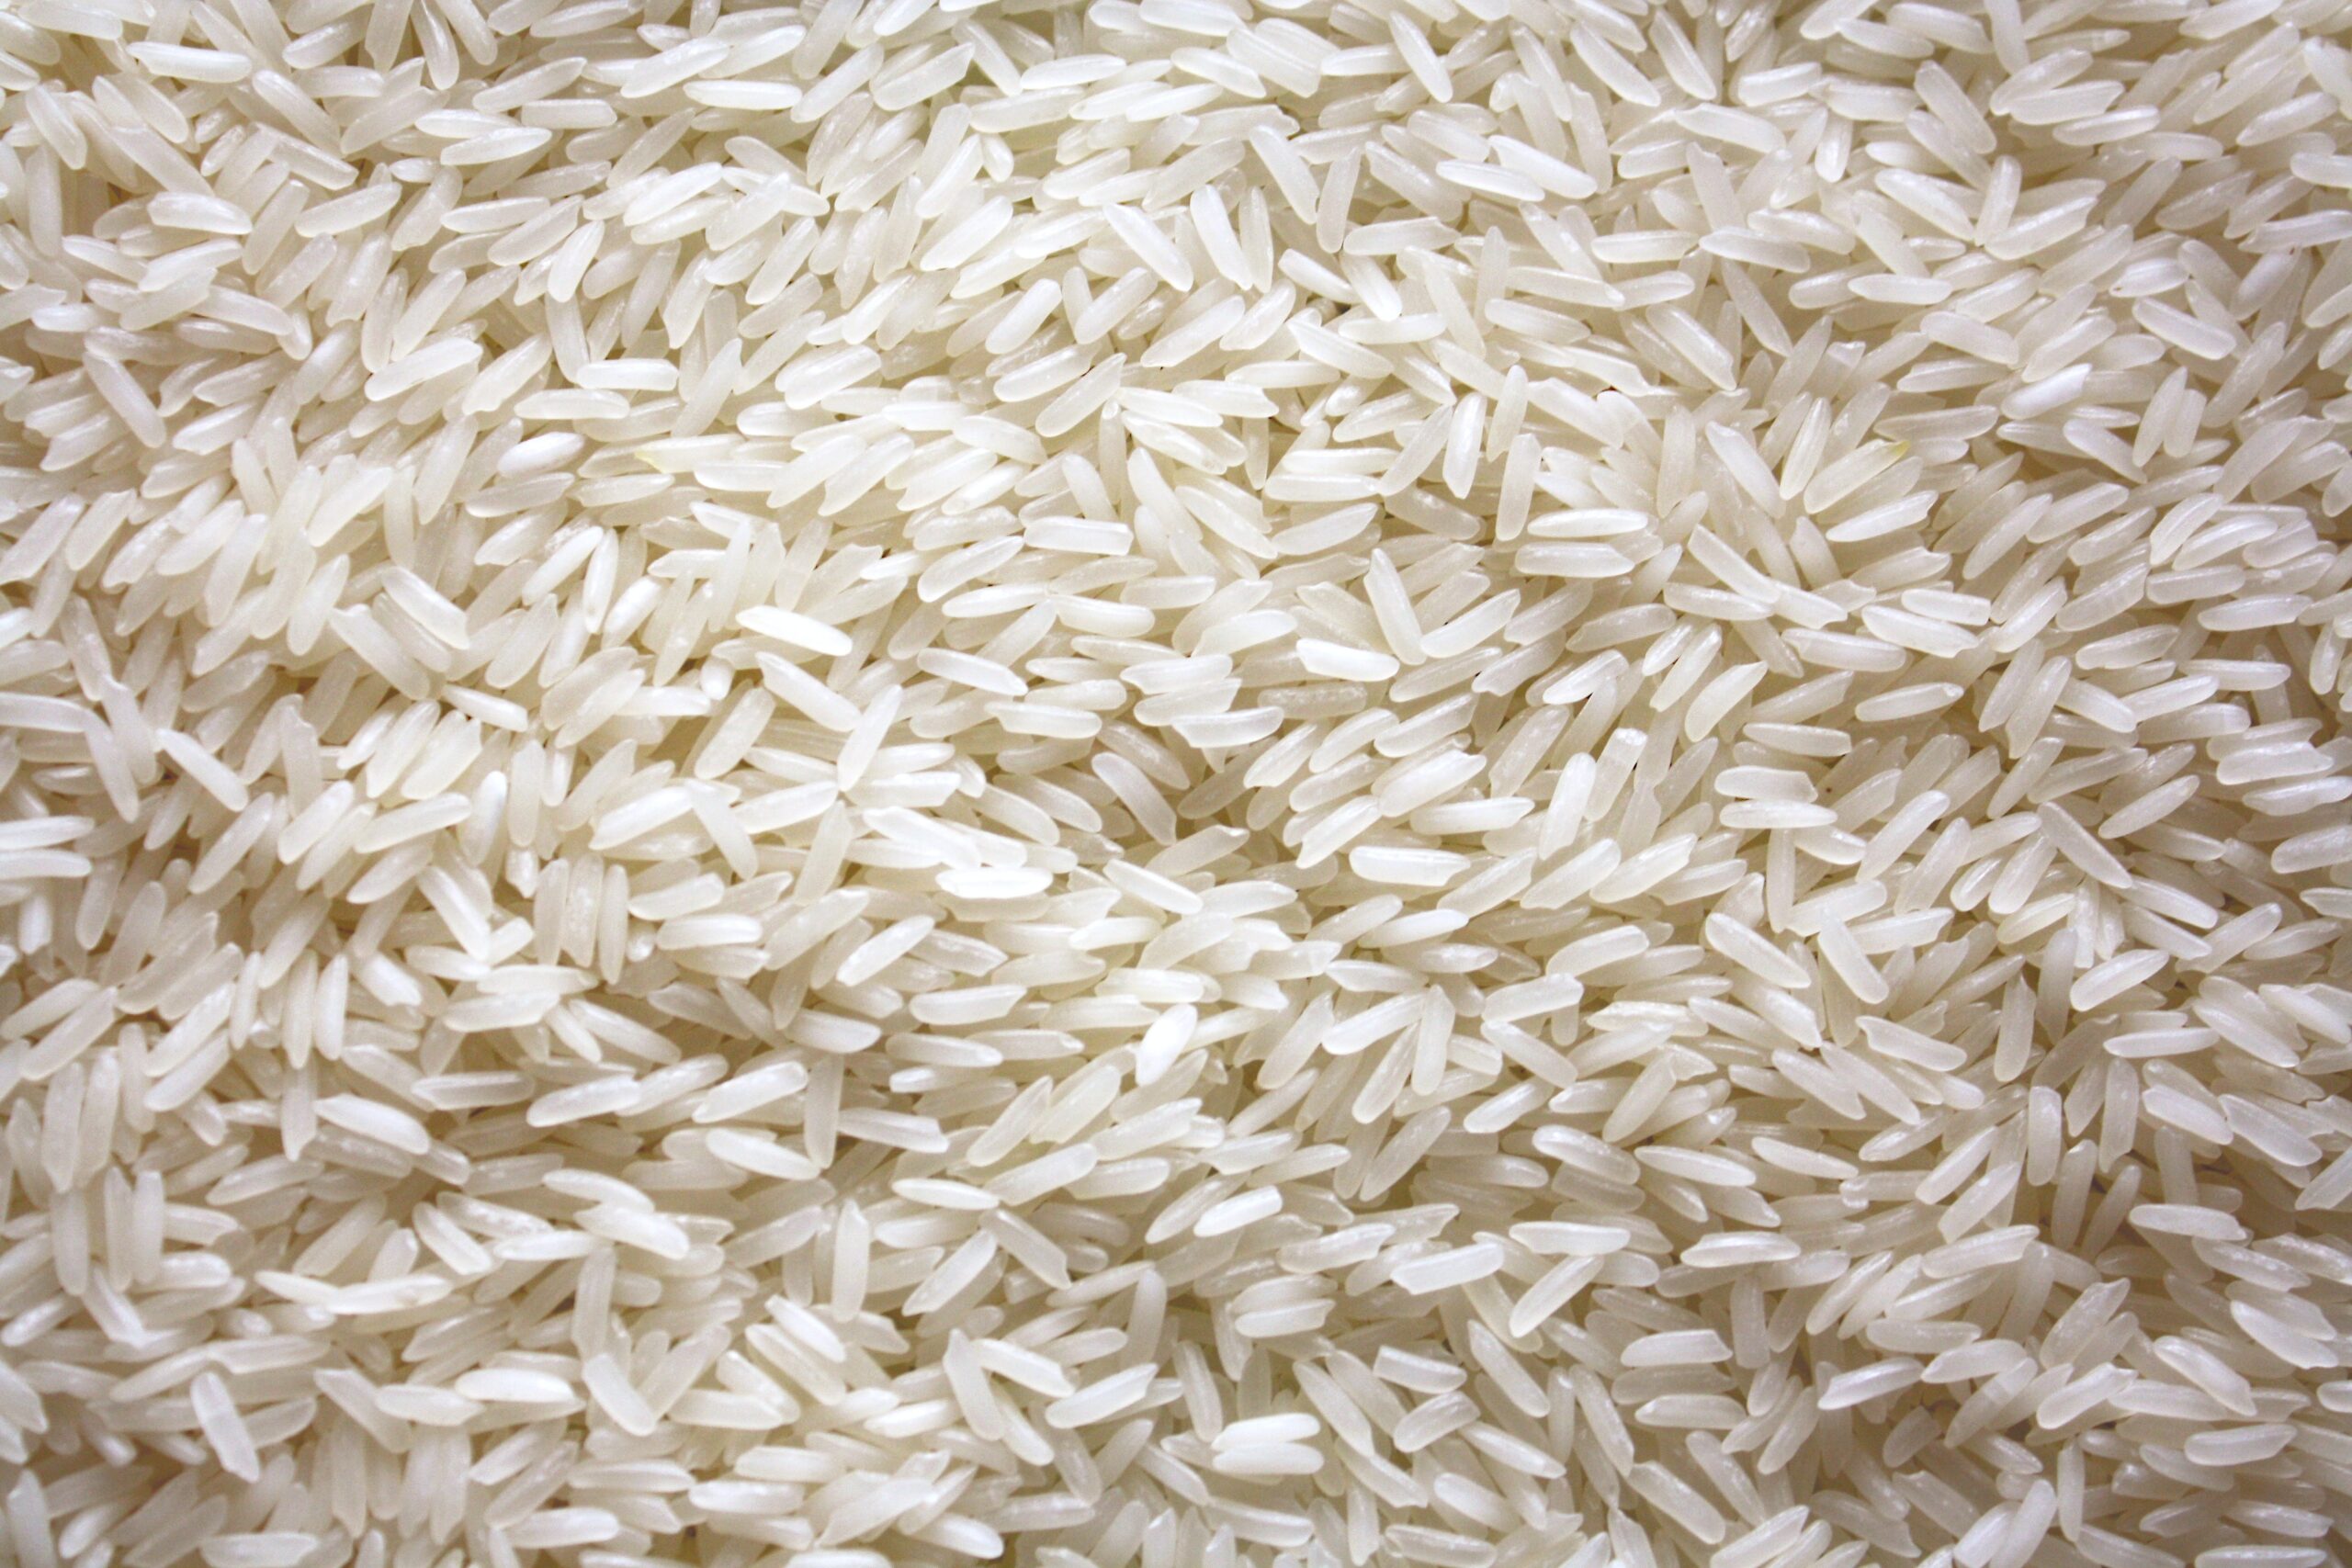 What are the different types of rice